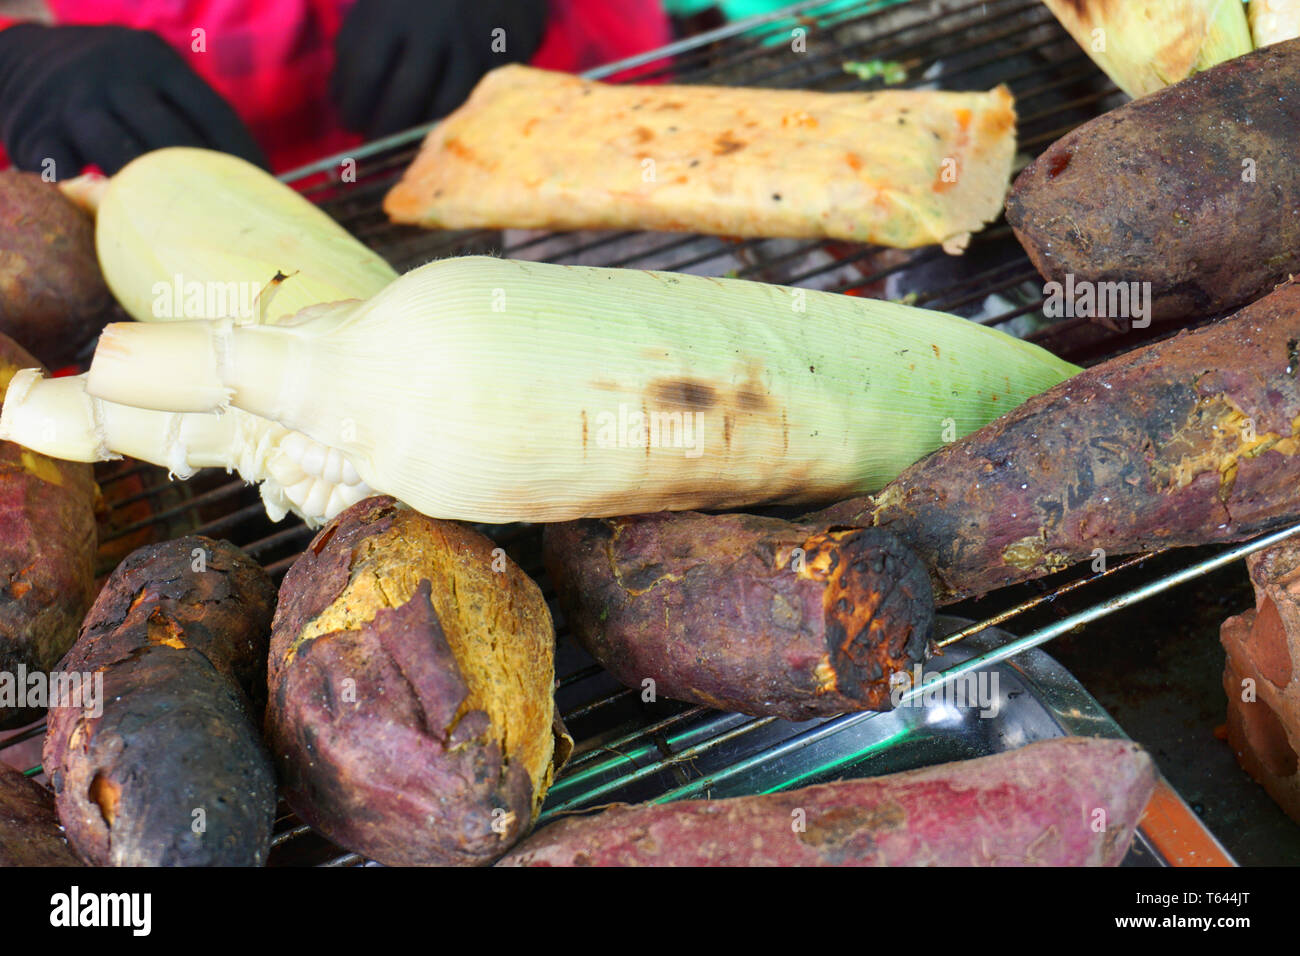 Khoai lang nuong - Delicious grilled whole sweet potatoes on grill charcoal Vietnamese street food weather Asian cuisine Da Lat Stock Photo - Alamy